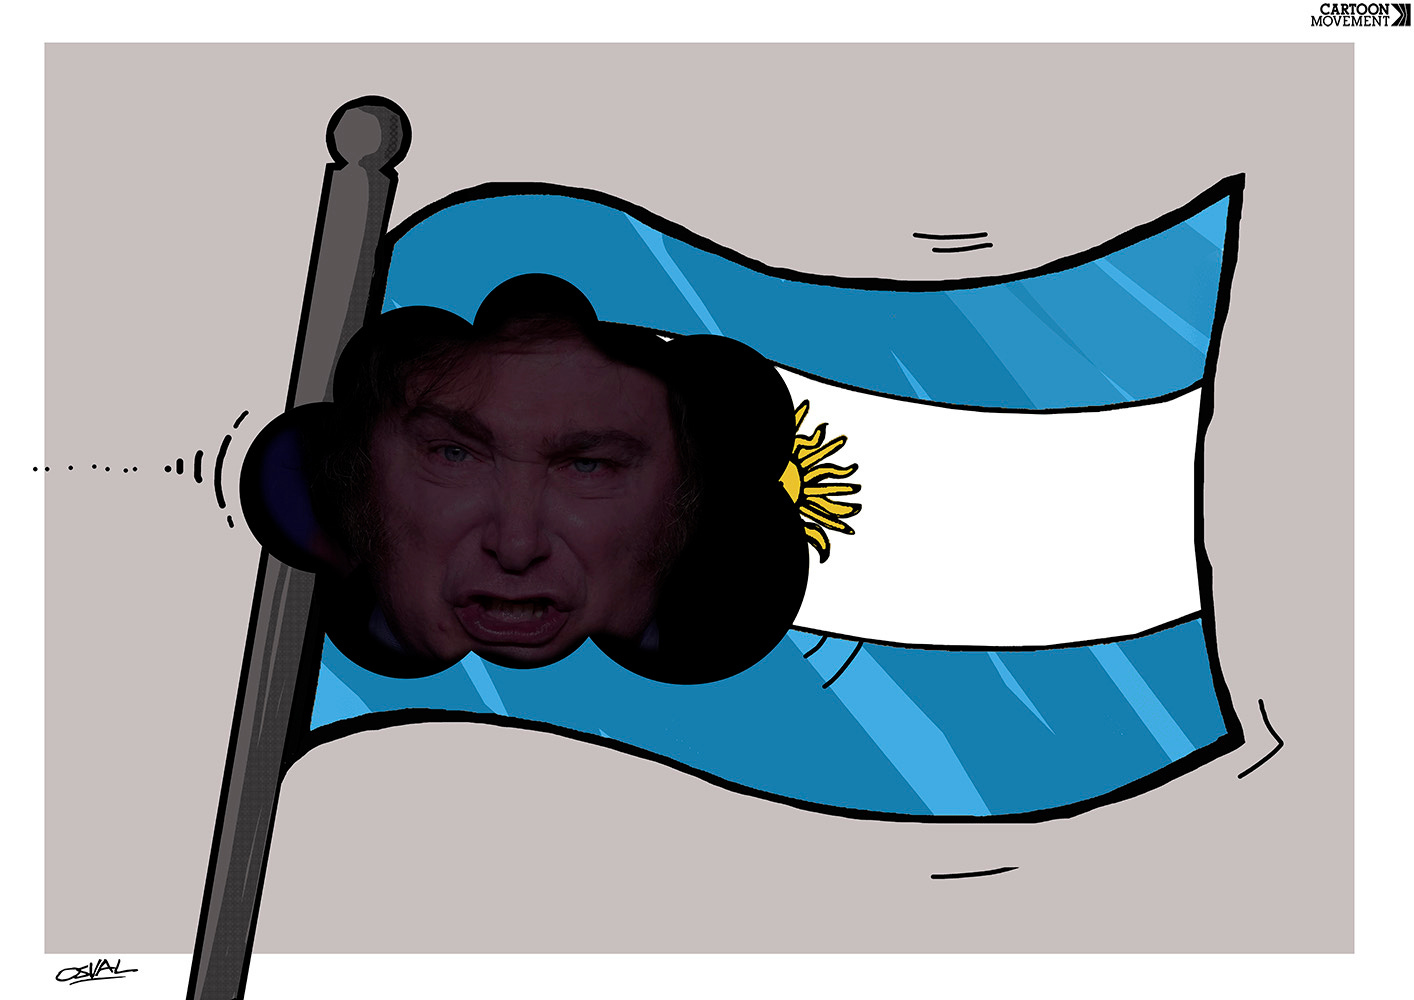 Cartoon showing the Argentinian flag. A storm cloud with the face of Milie is moving in to block the sun on the flag.